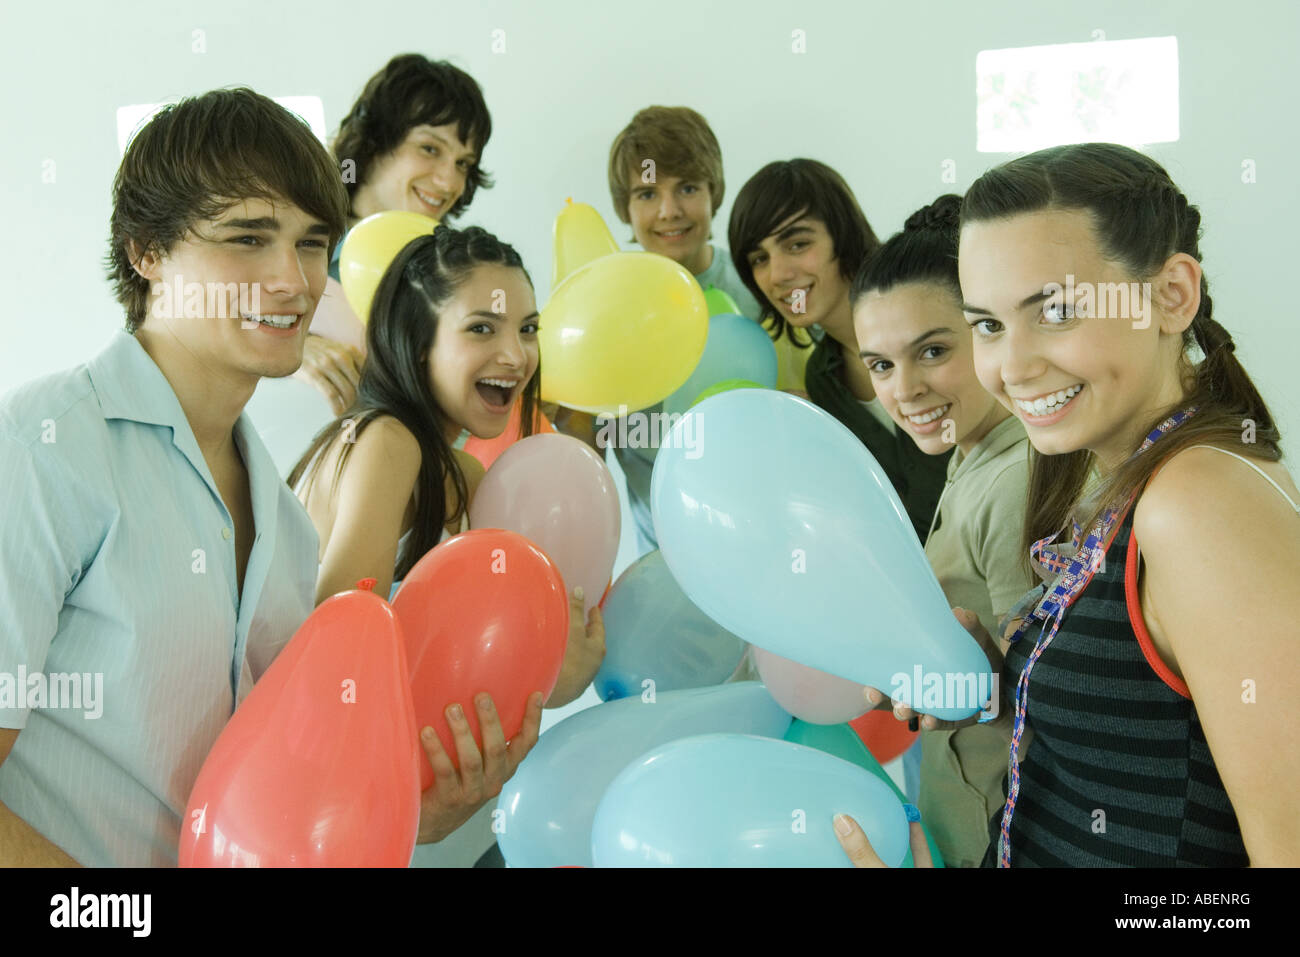 Group of young friends with balloons Stock Photo